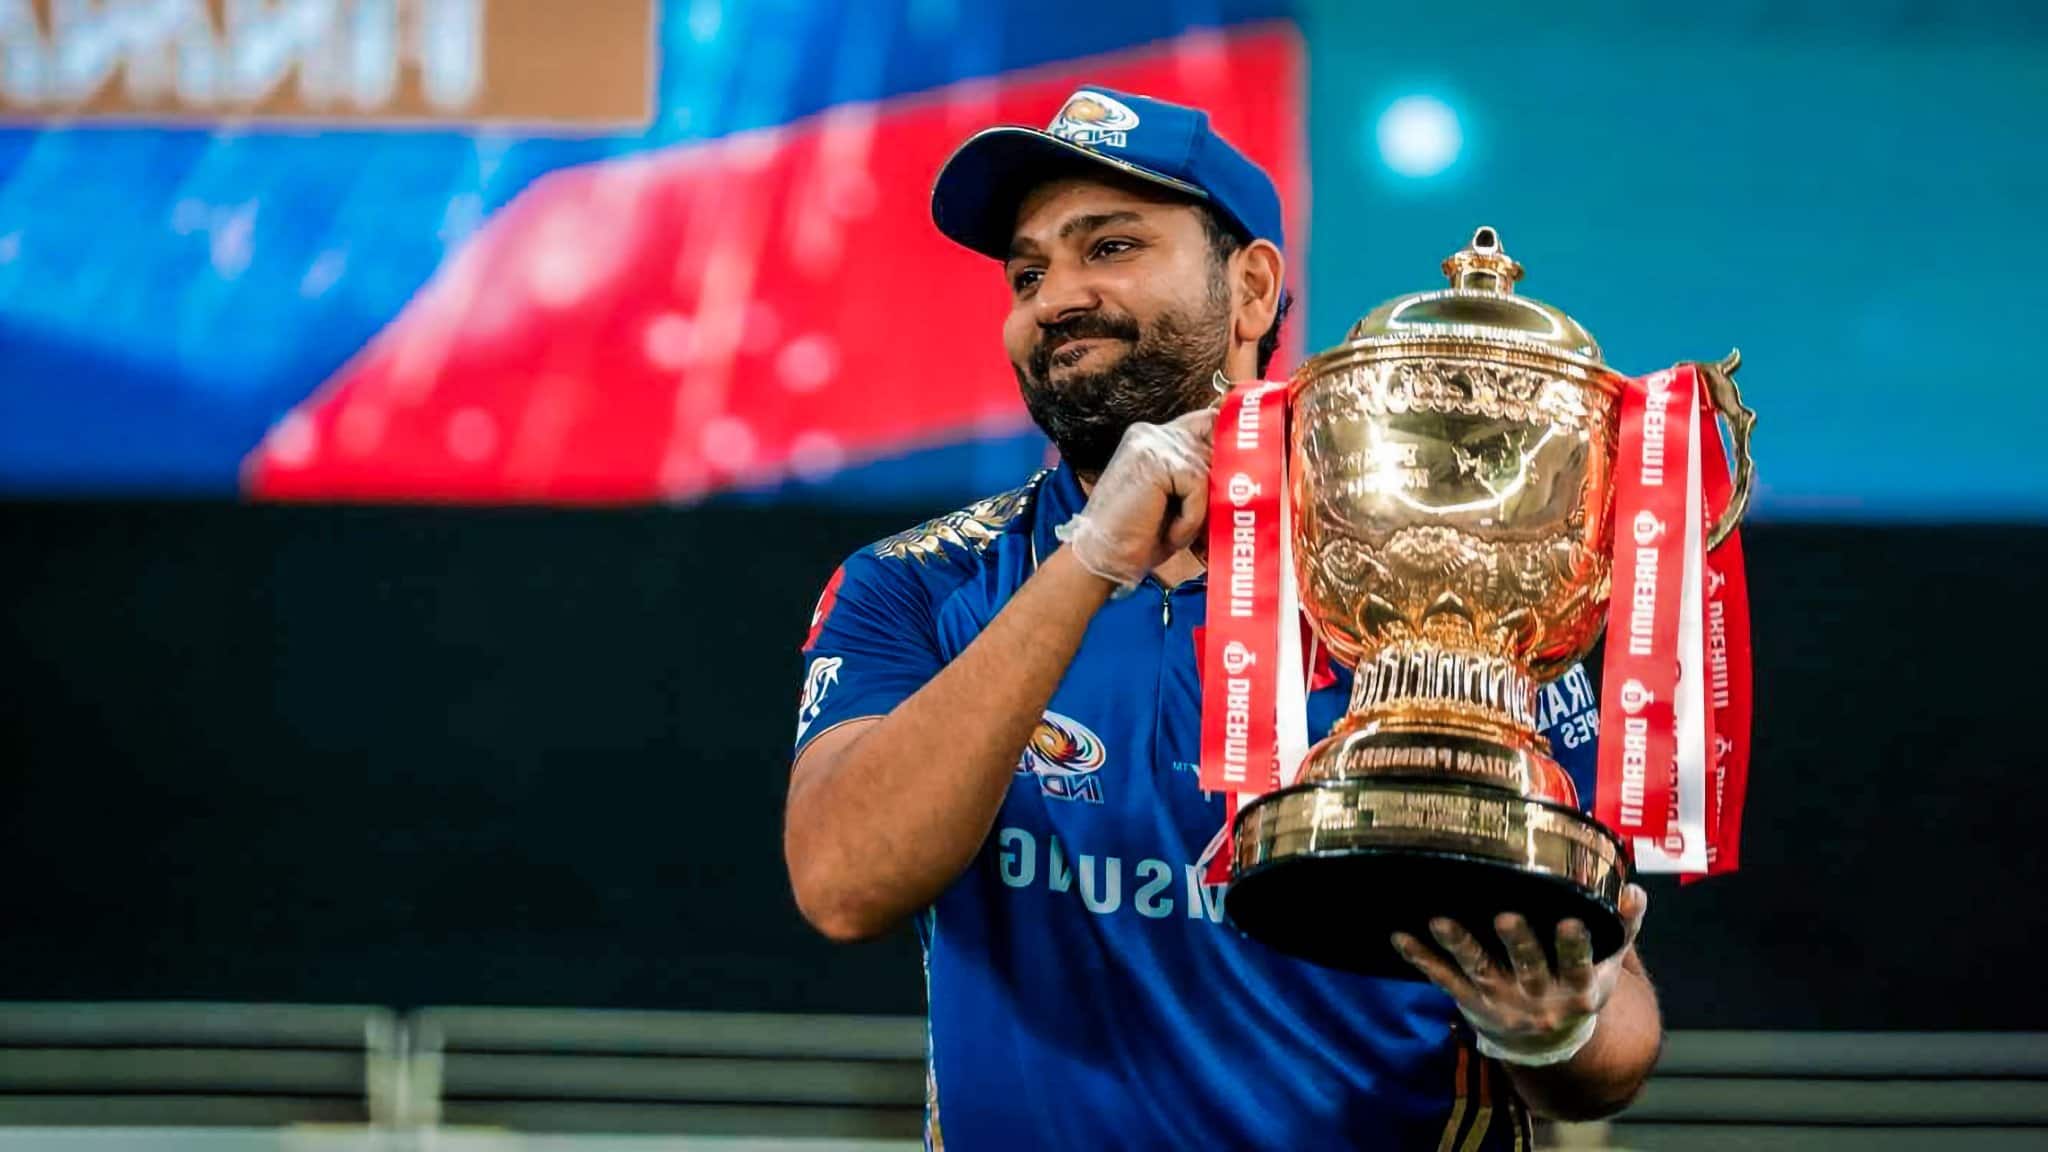 Rohit Sharma is among the highest-paid players in IPL (X.com)